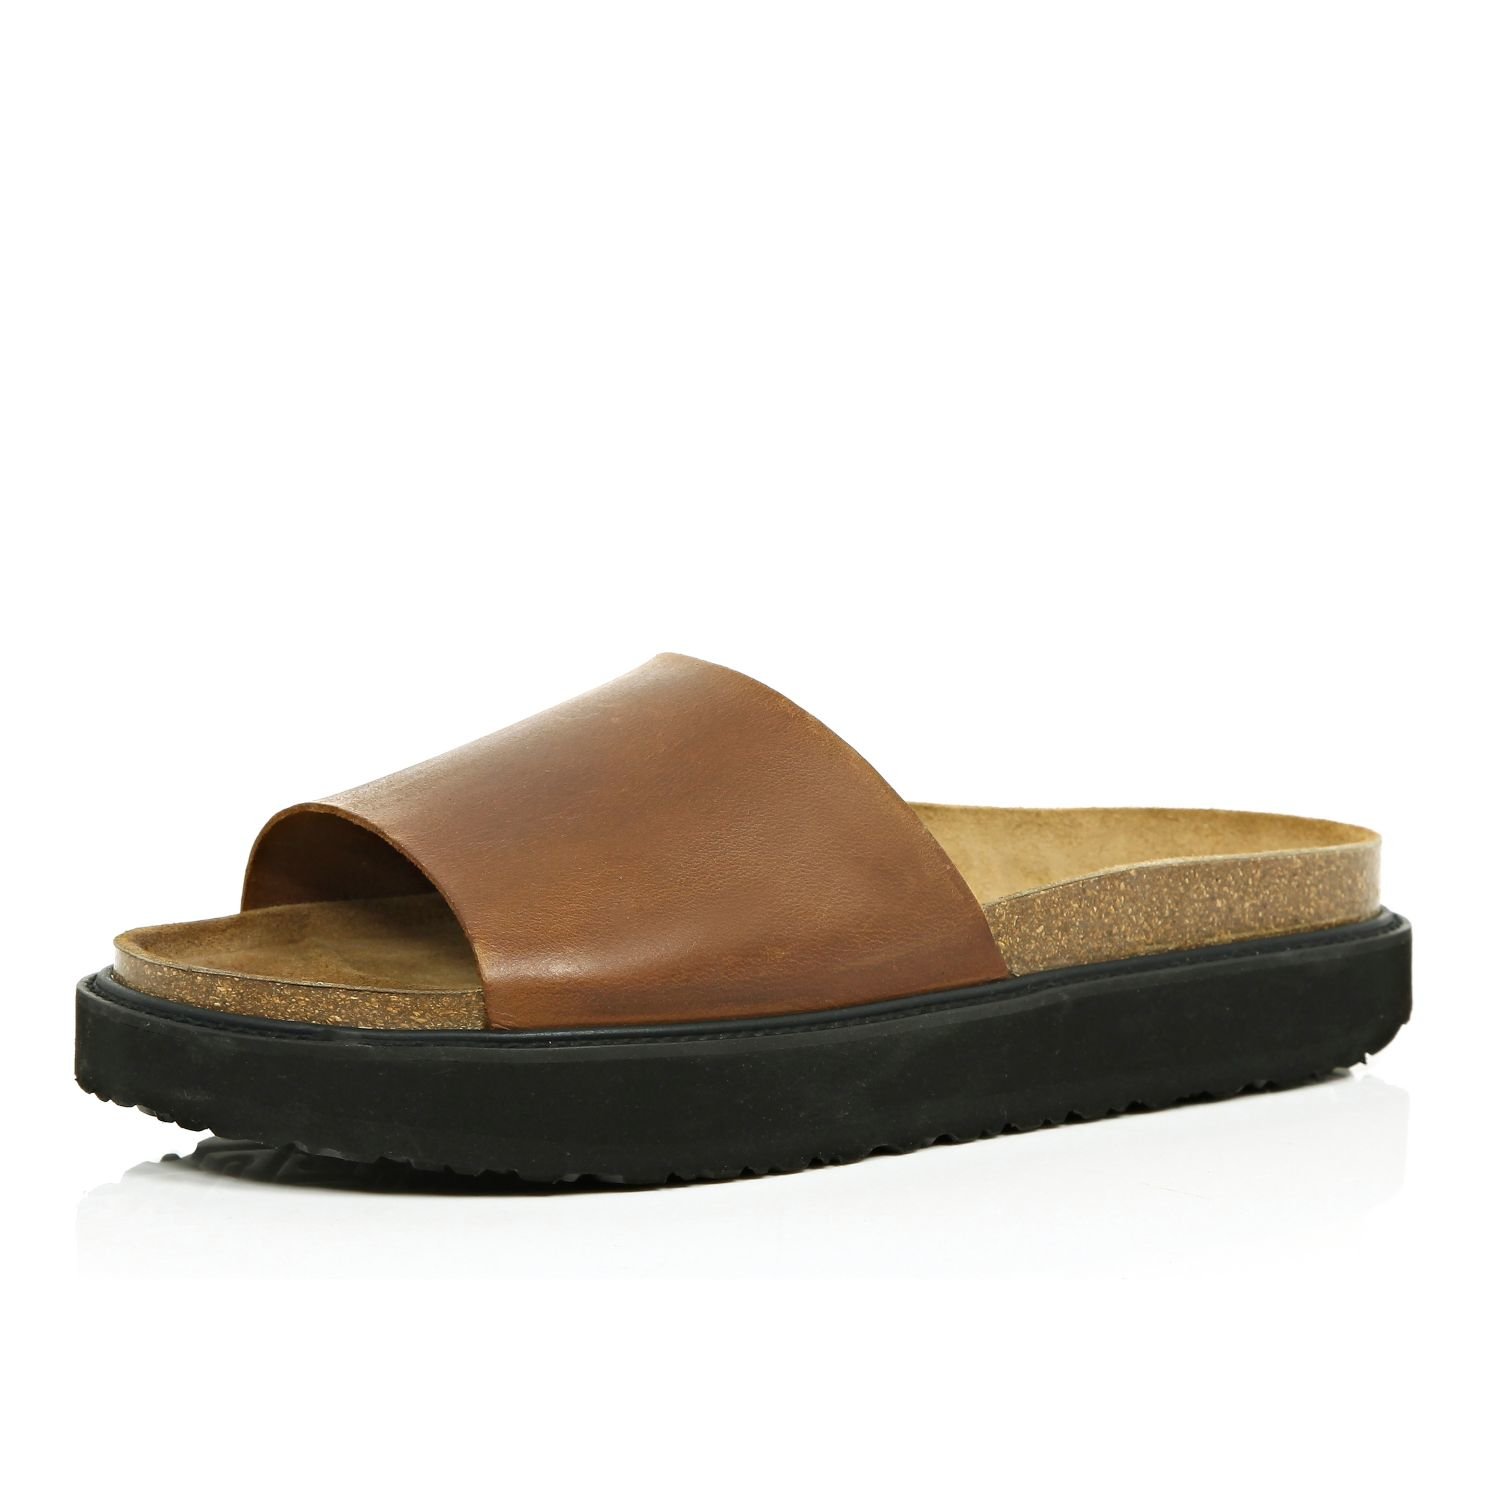 River Island Brown Leather Chunky Slide Sandals in Brown for Men - Lyst